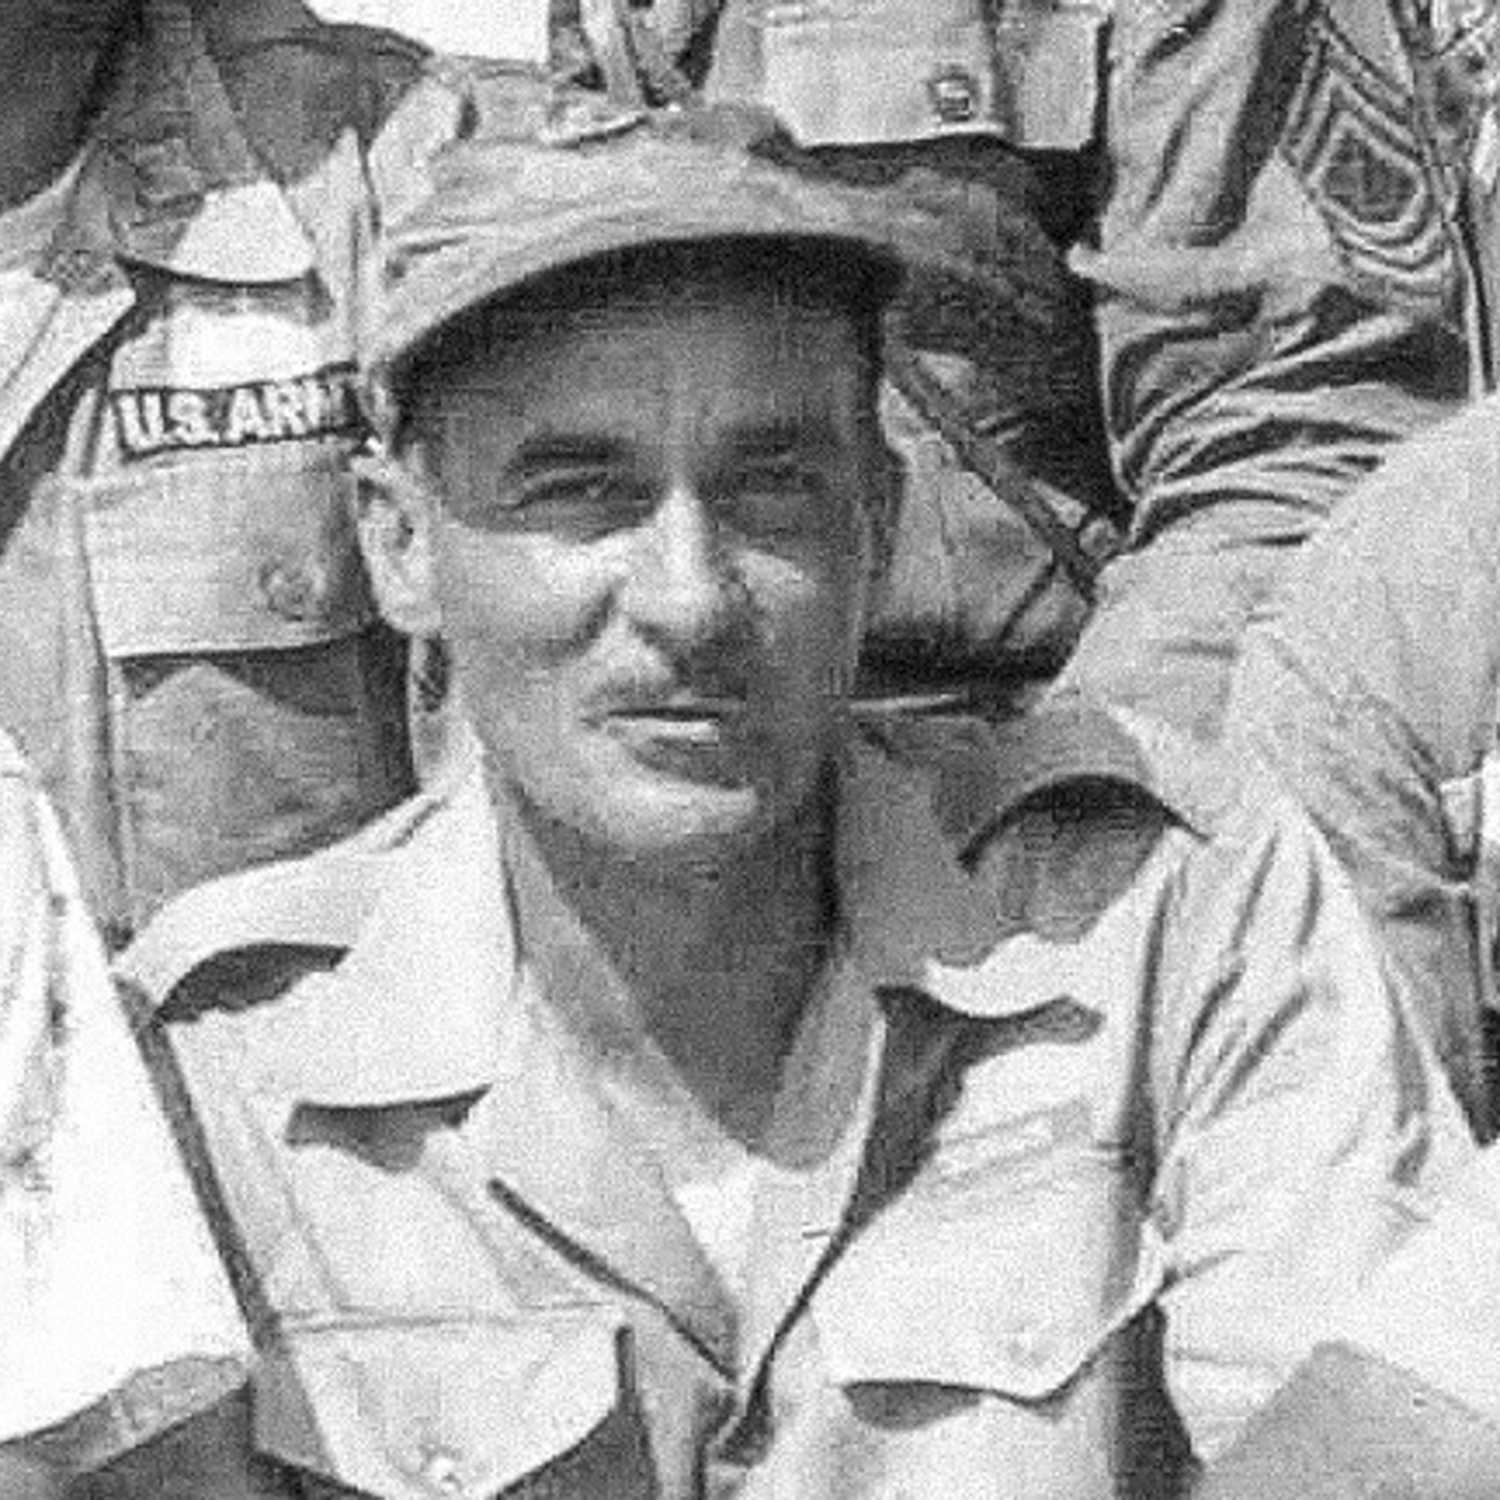 A black and white close up of Jennings Benson smirking at the camera in his army uniform surrounded by other soldiers in uniform.